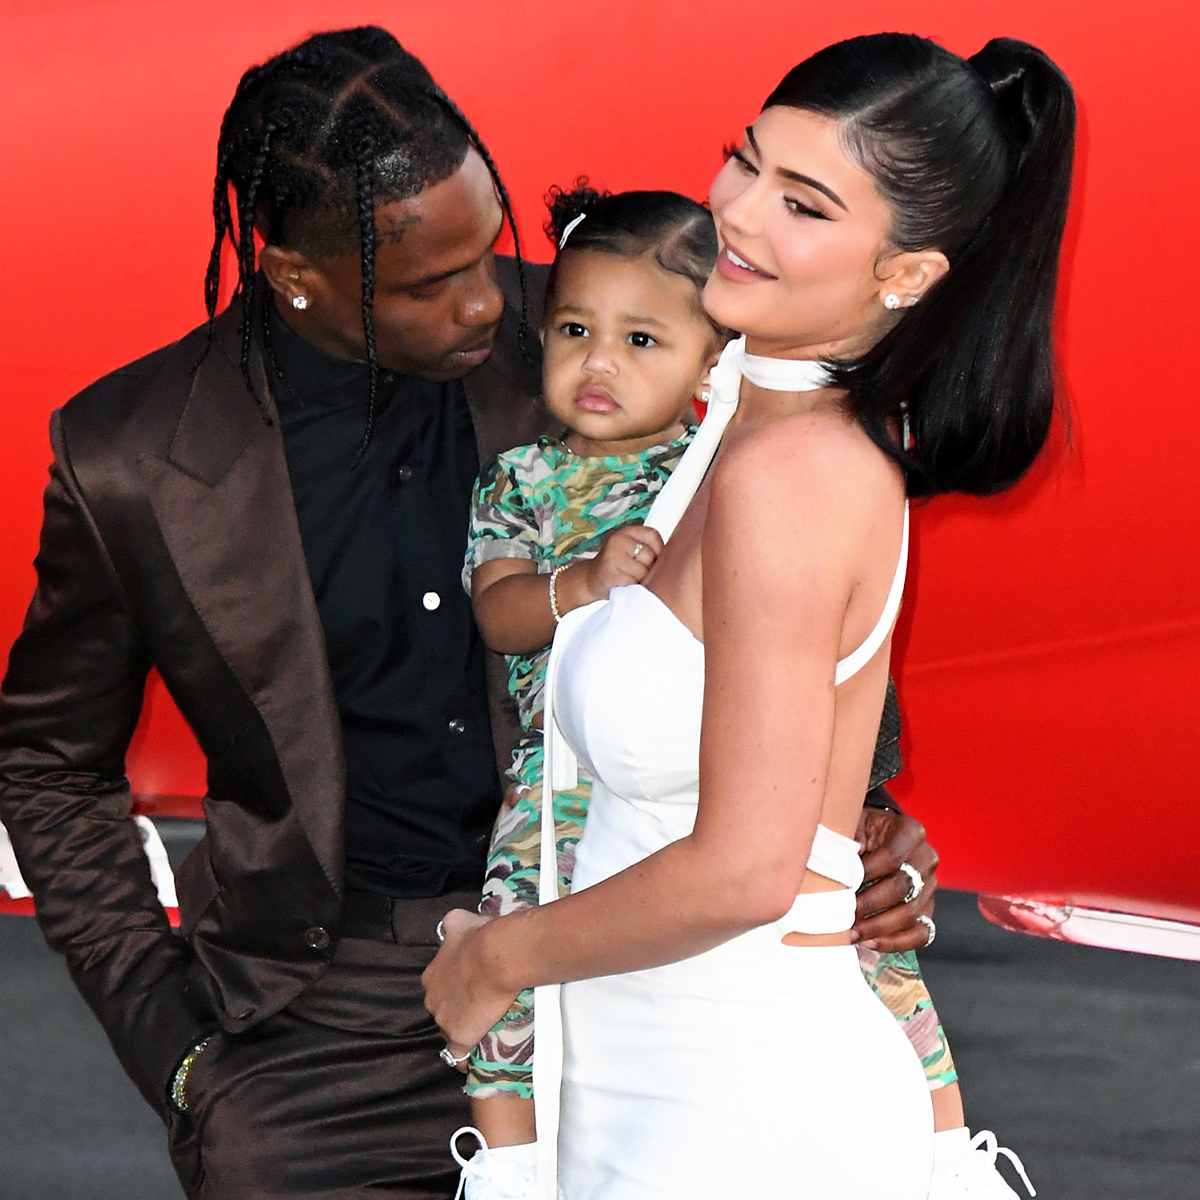 Kylie Jenner reveals where she and ex-husband Travis Scott stand as co-parents